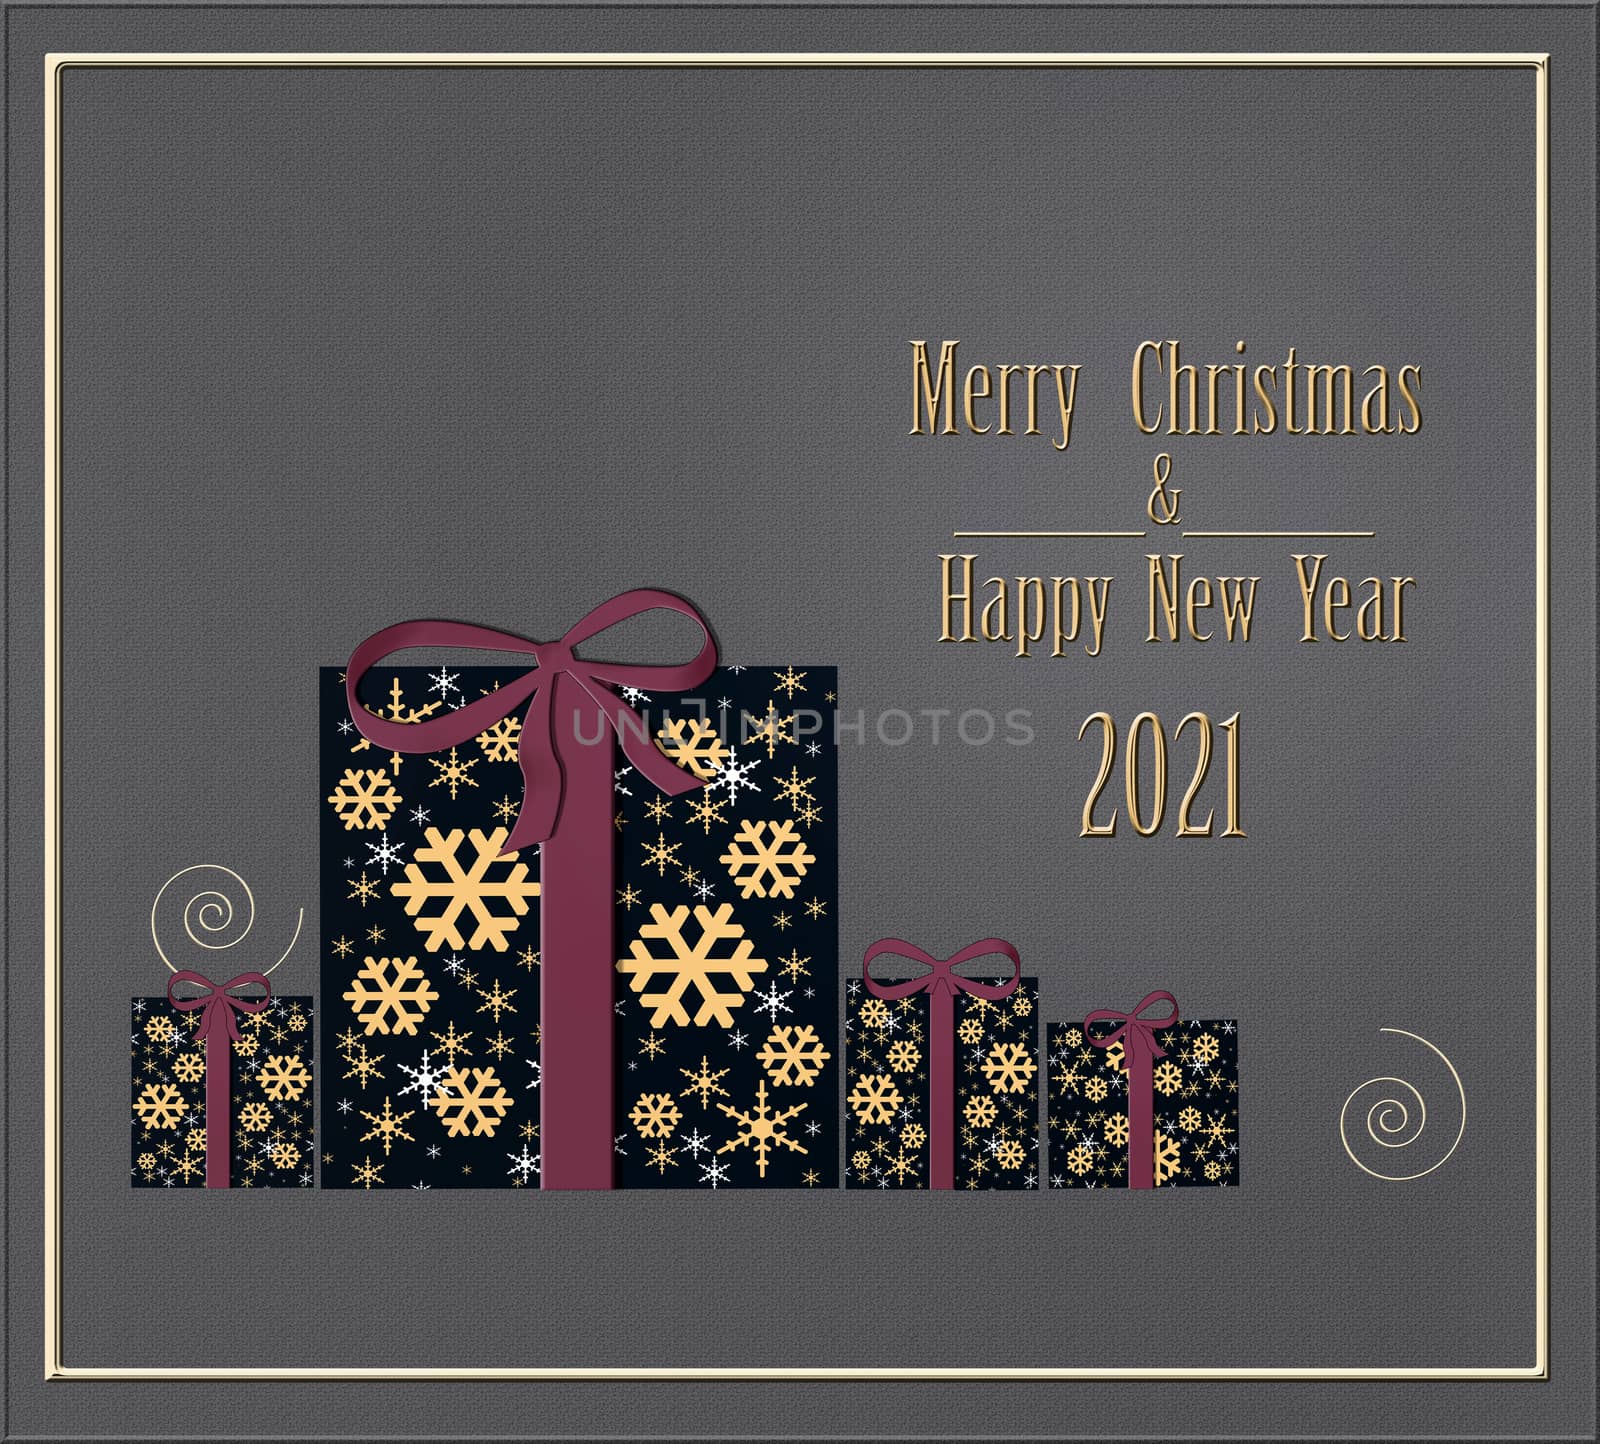 Luxury Christmas greeting card concept with gold words Merry Christmas and 2021 Happy New Year. Abstract wrapped gift box with golden snowflakes. Illustration